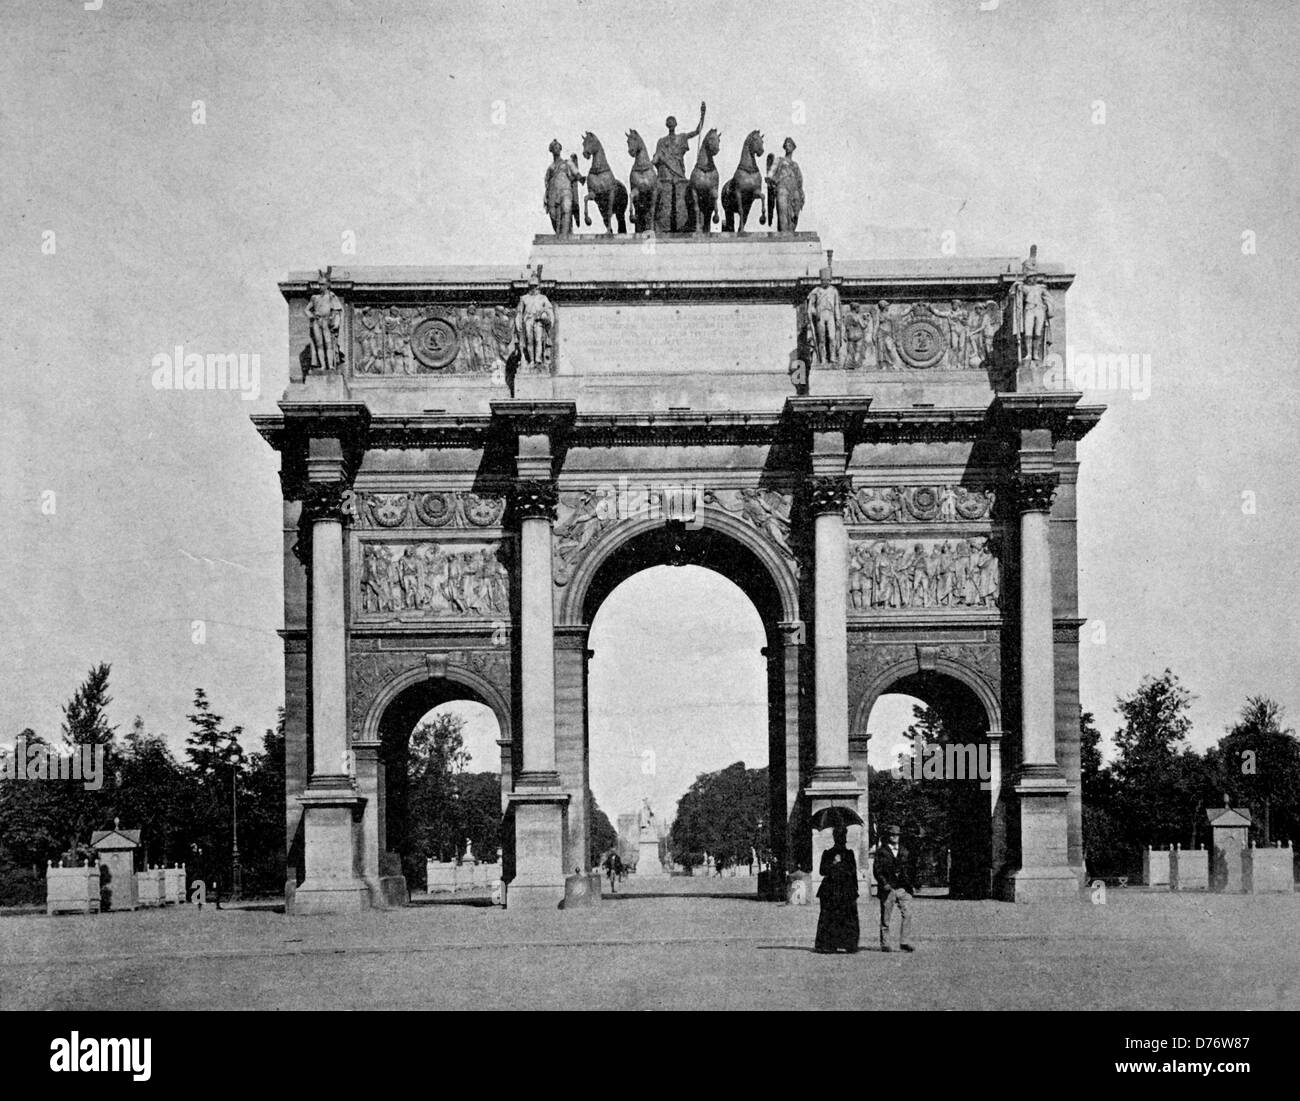 One of the first halftones, Arc de Triomphe in Paris, France, 1880 Stock Photo